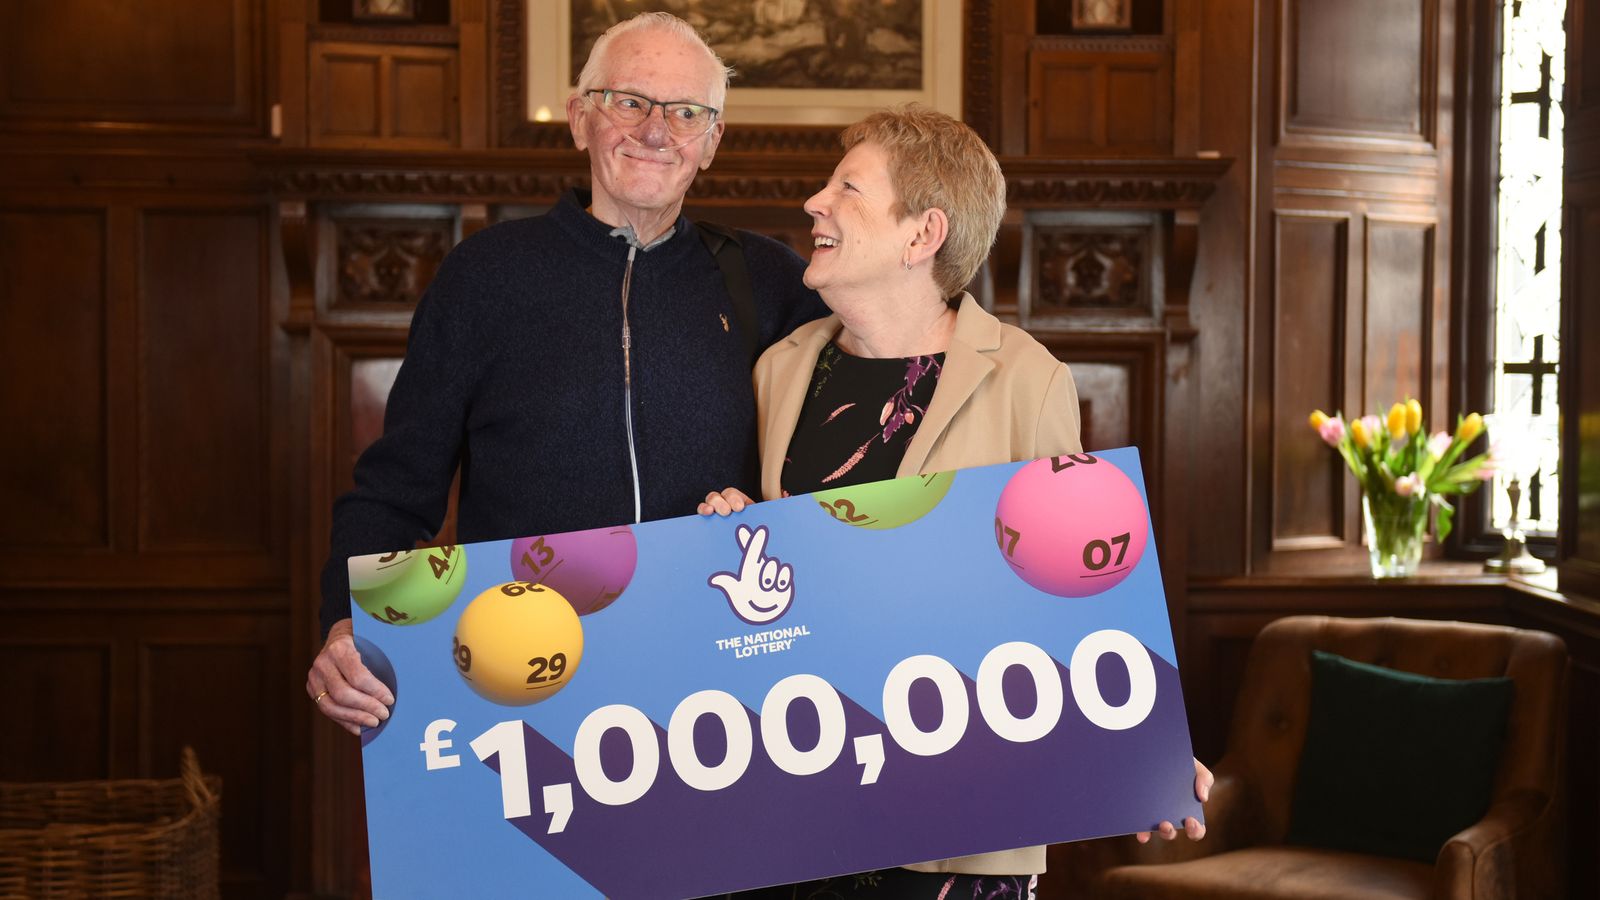 'i thought it was a scam': woman who won £1m on lottery to buy new home with terminally ill husband